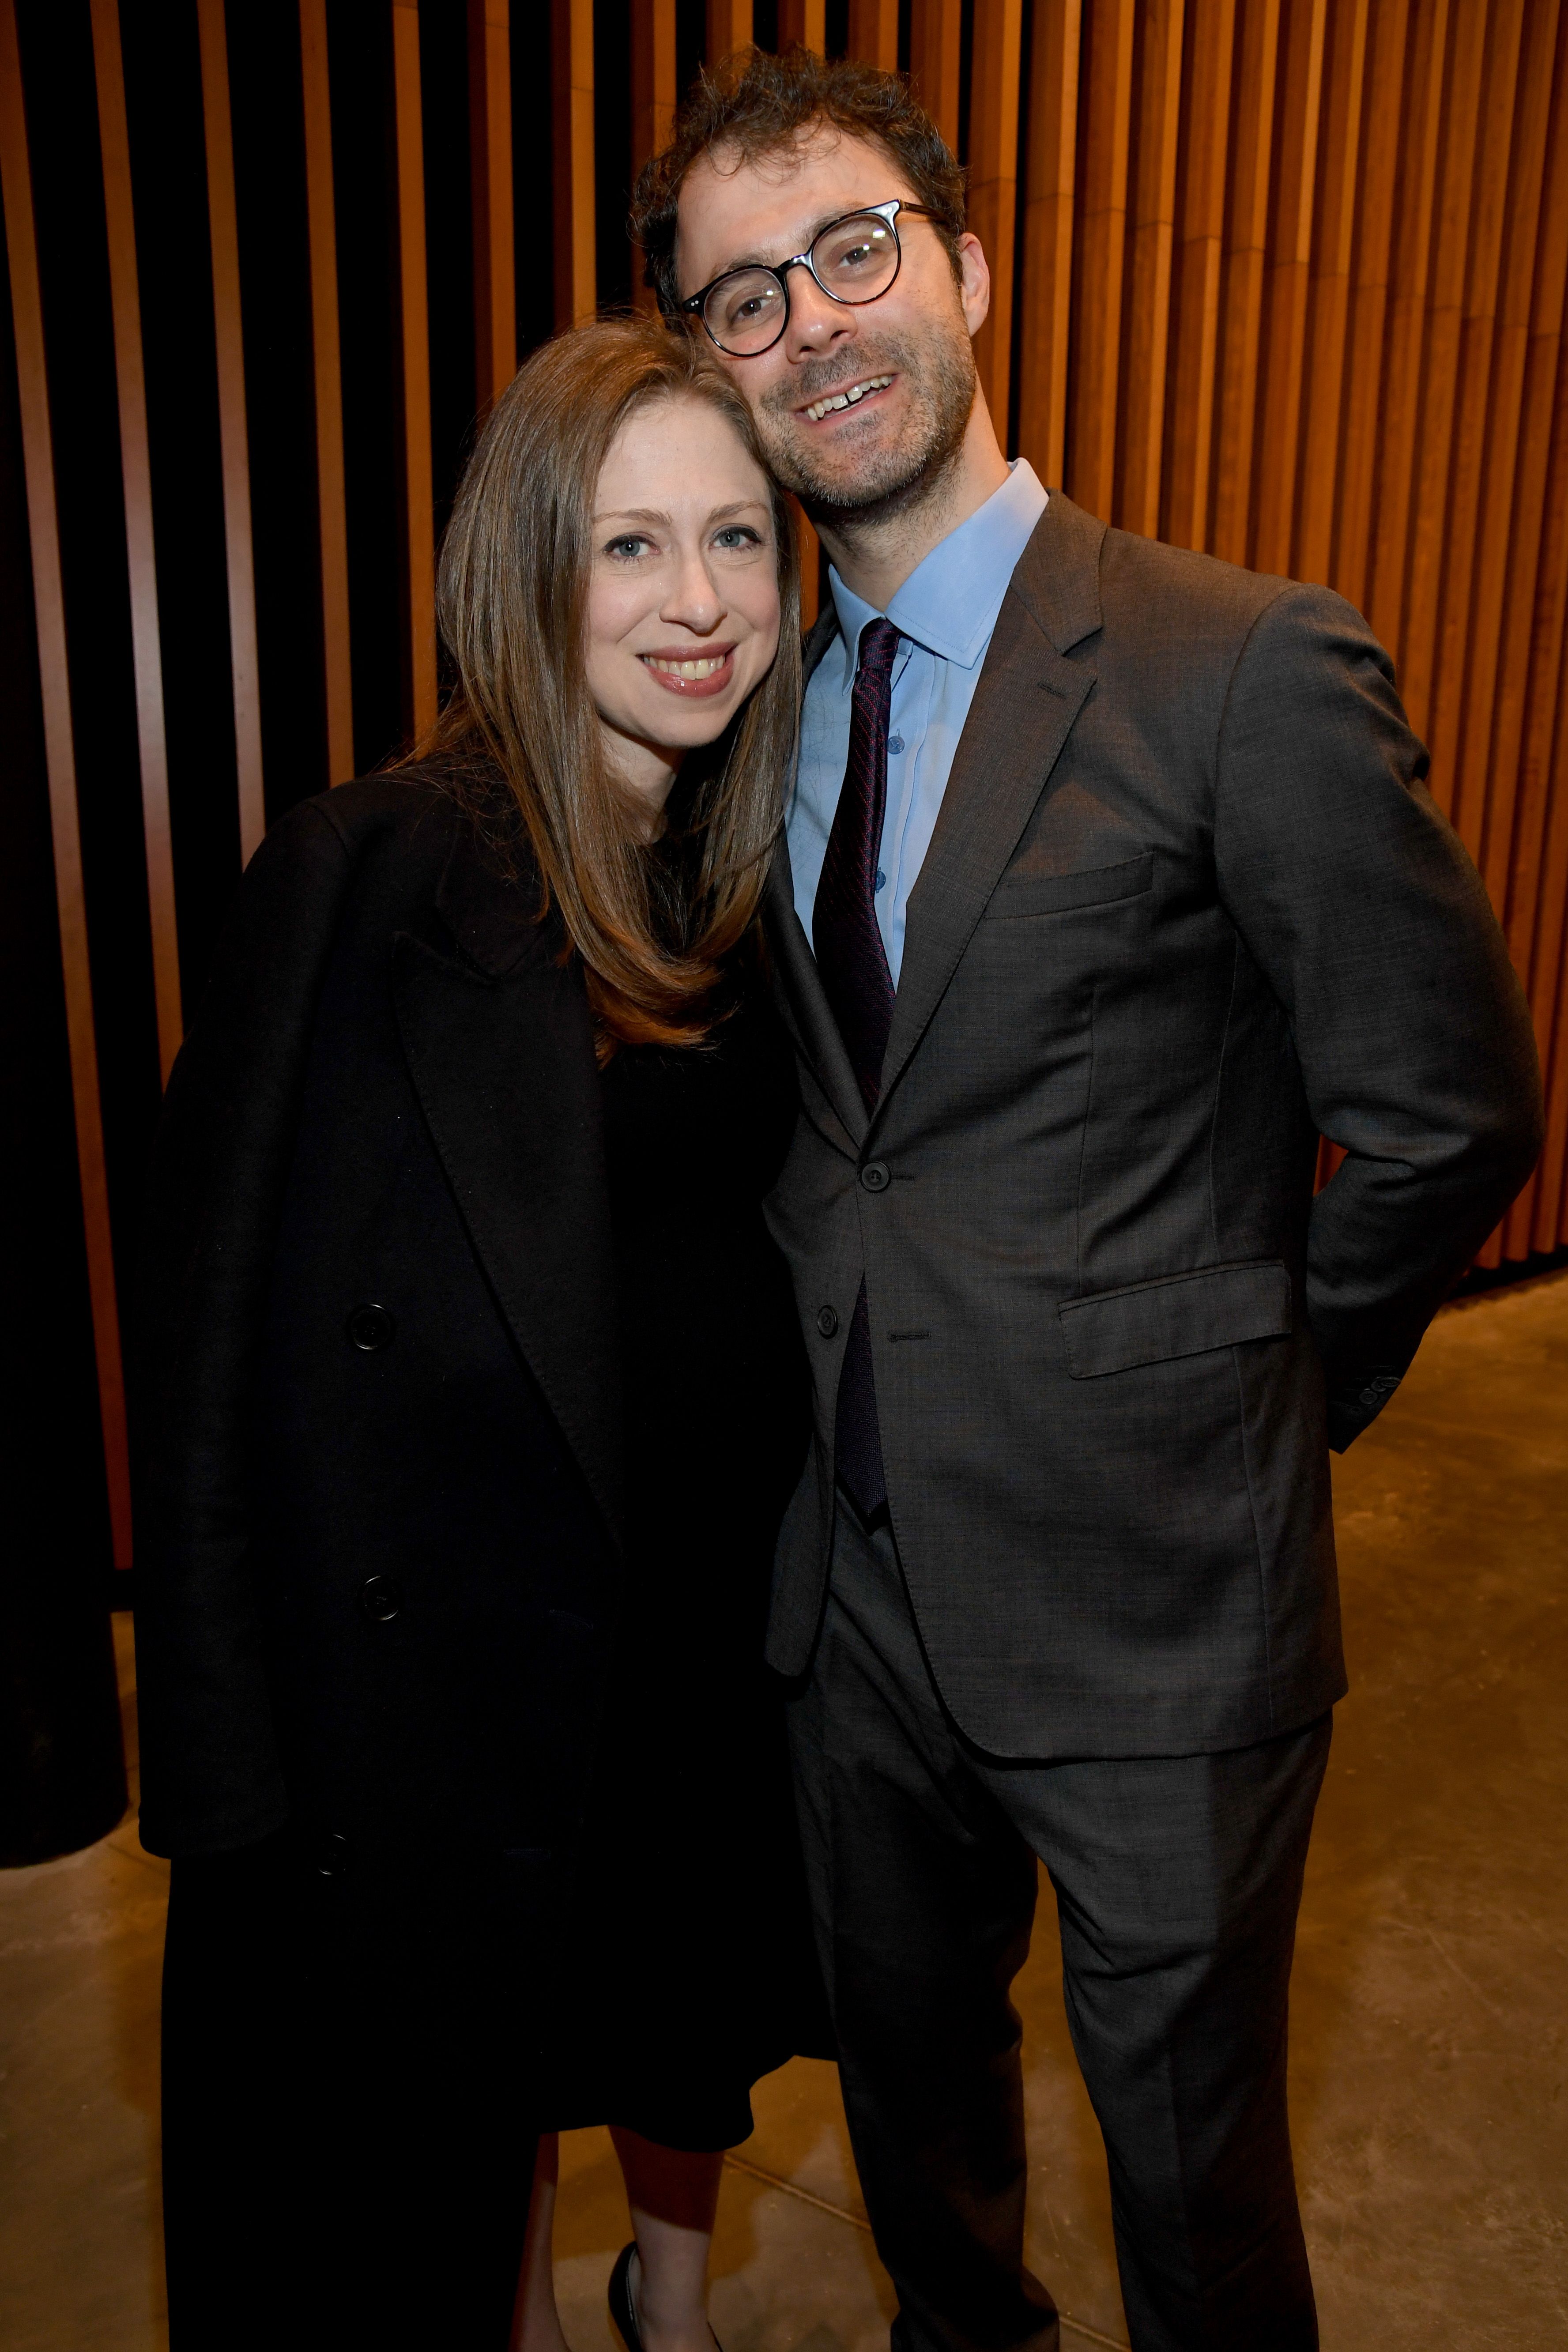 Who Is Chelsea Clintons Husband Facts About Marc Mezvinsky